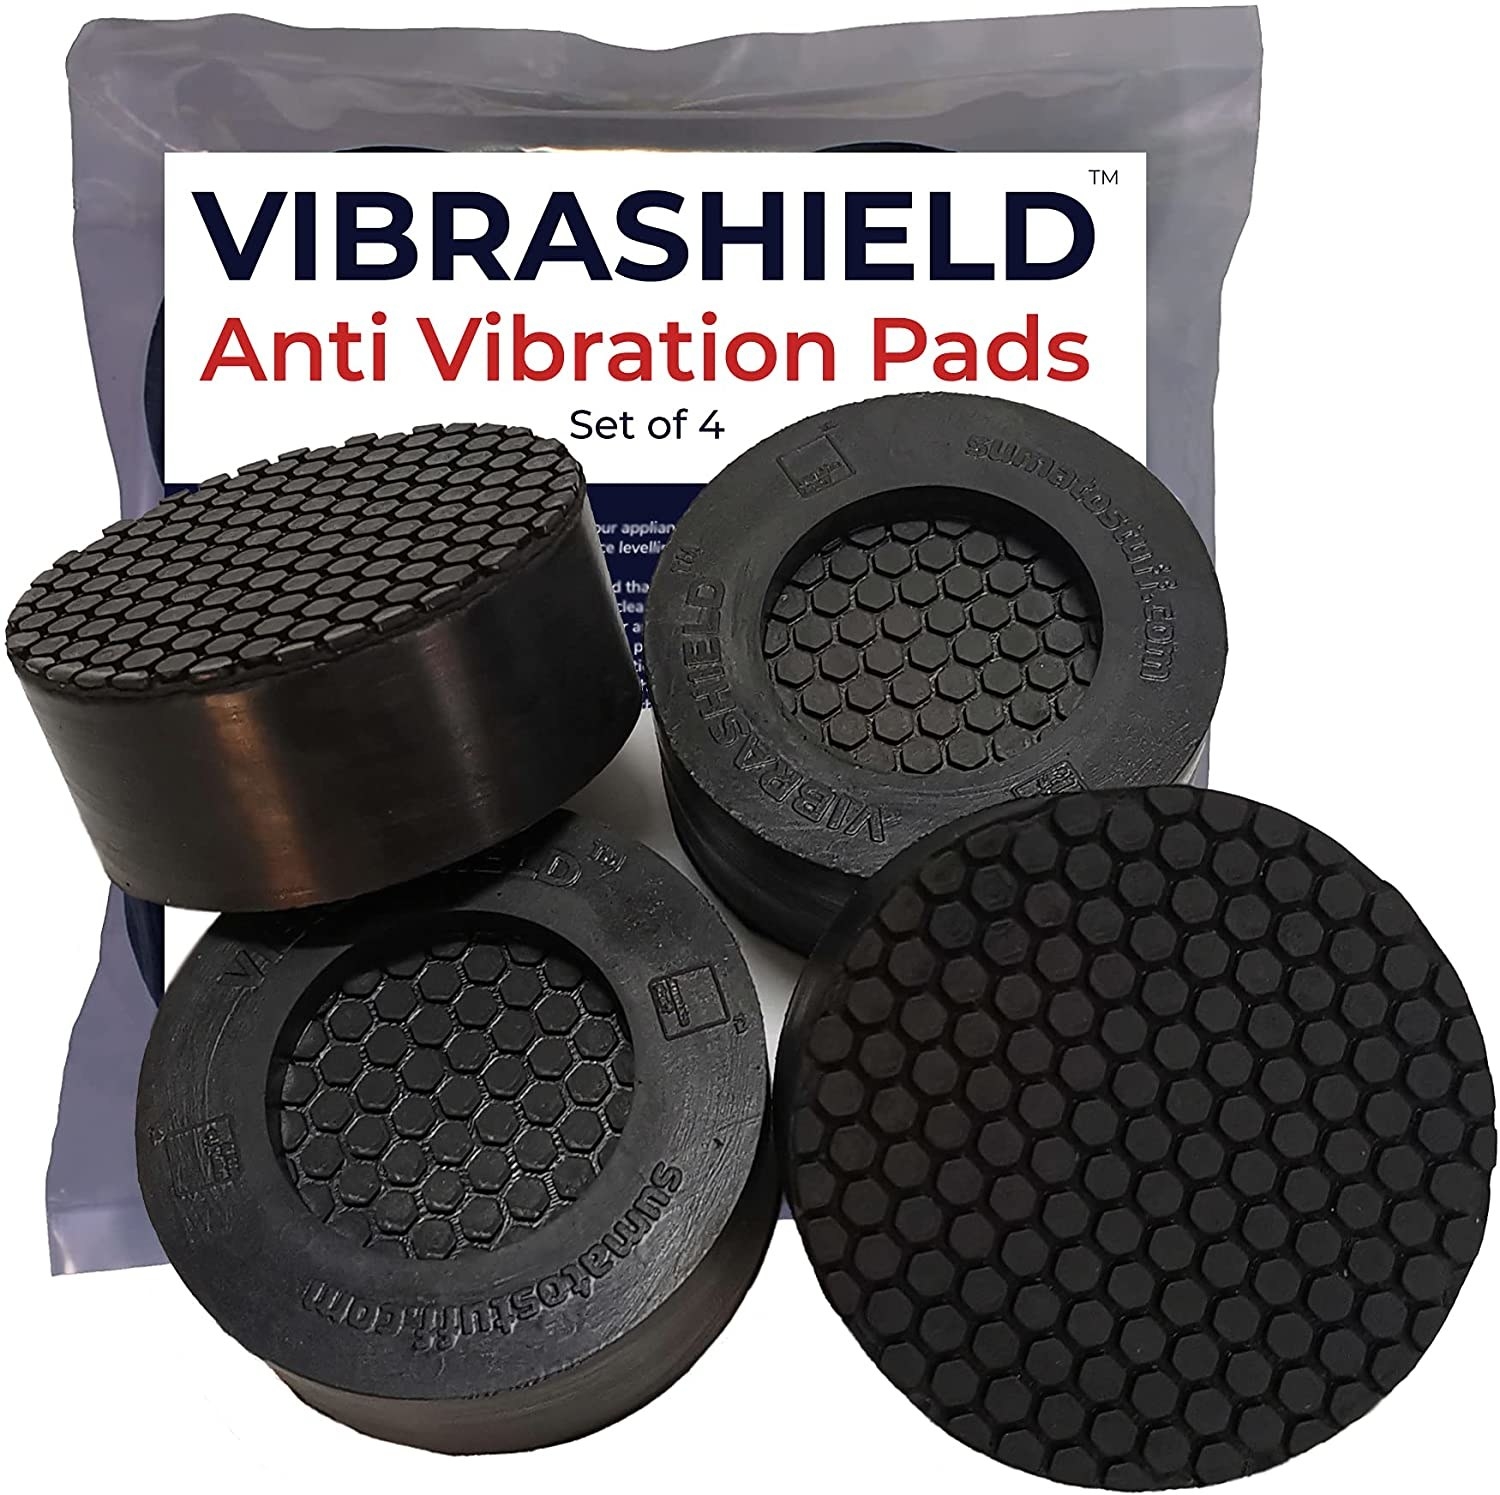 a pack of four anti-vibration appliance pads